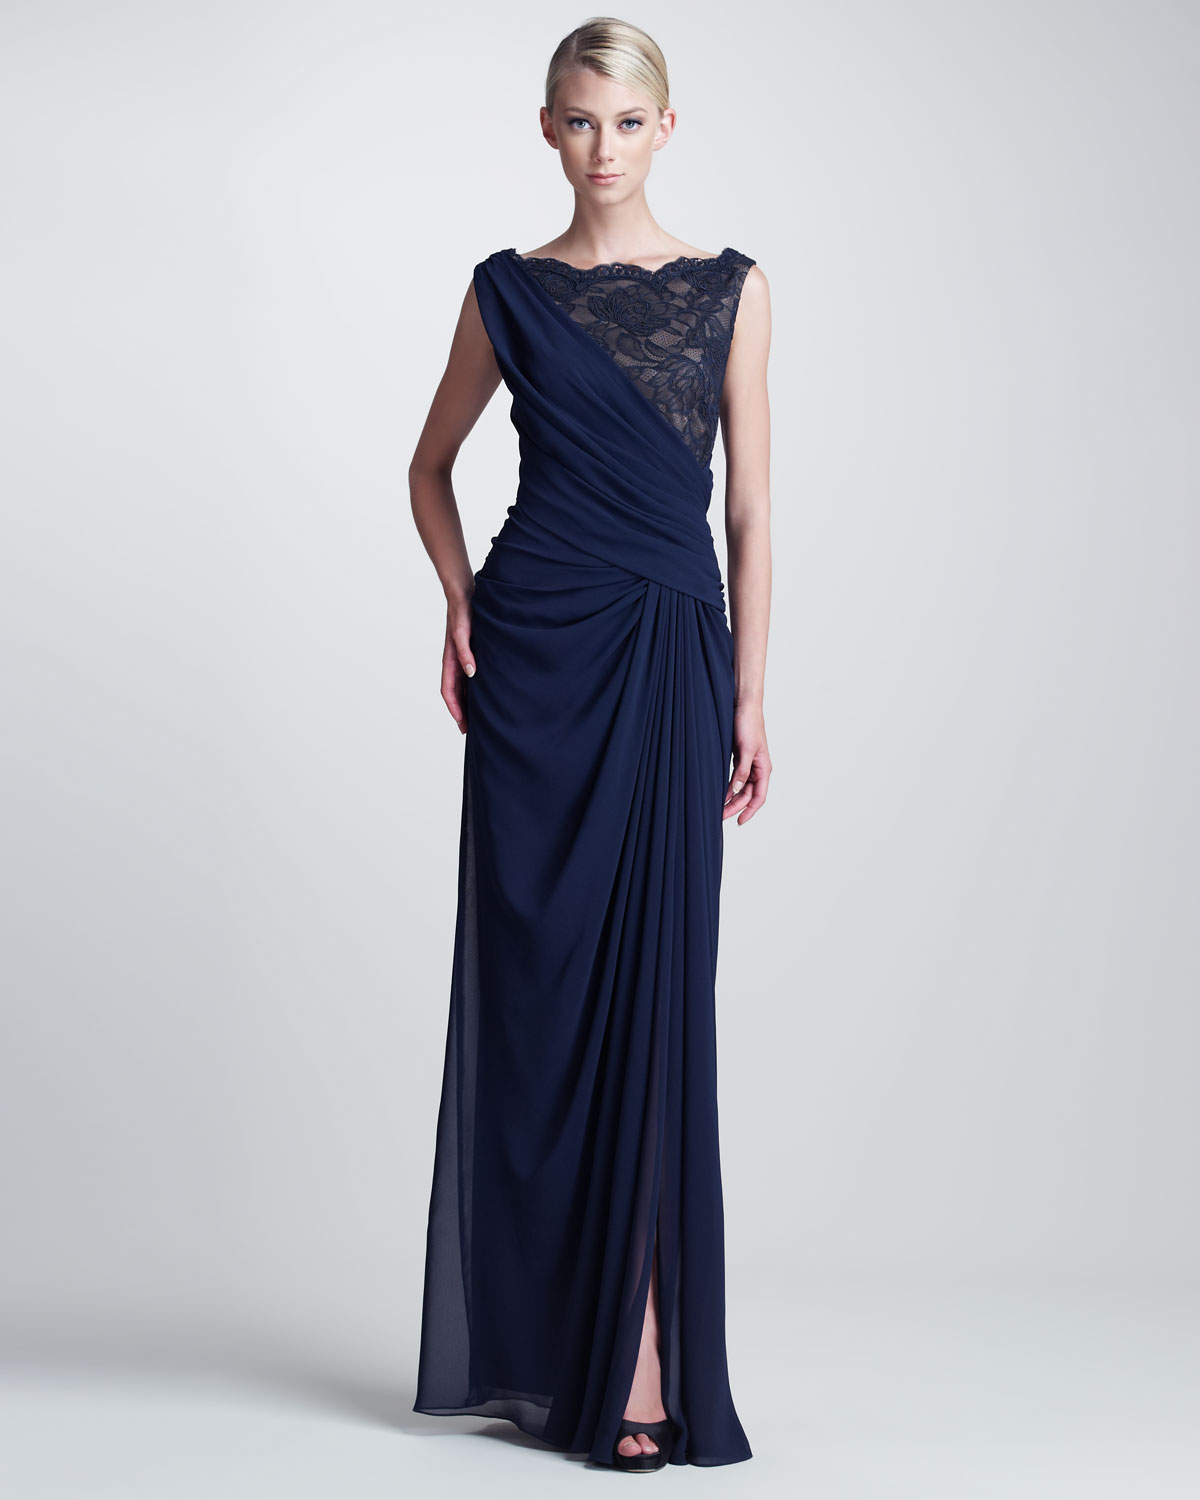 Tadashi Shoji Draped Lace Bust Gown in Navy Nude (Blue) - Lyst